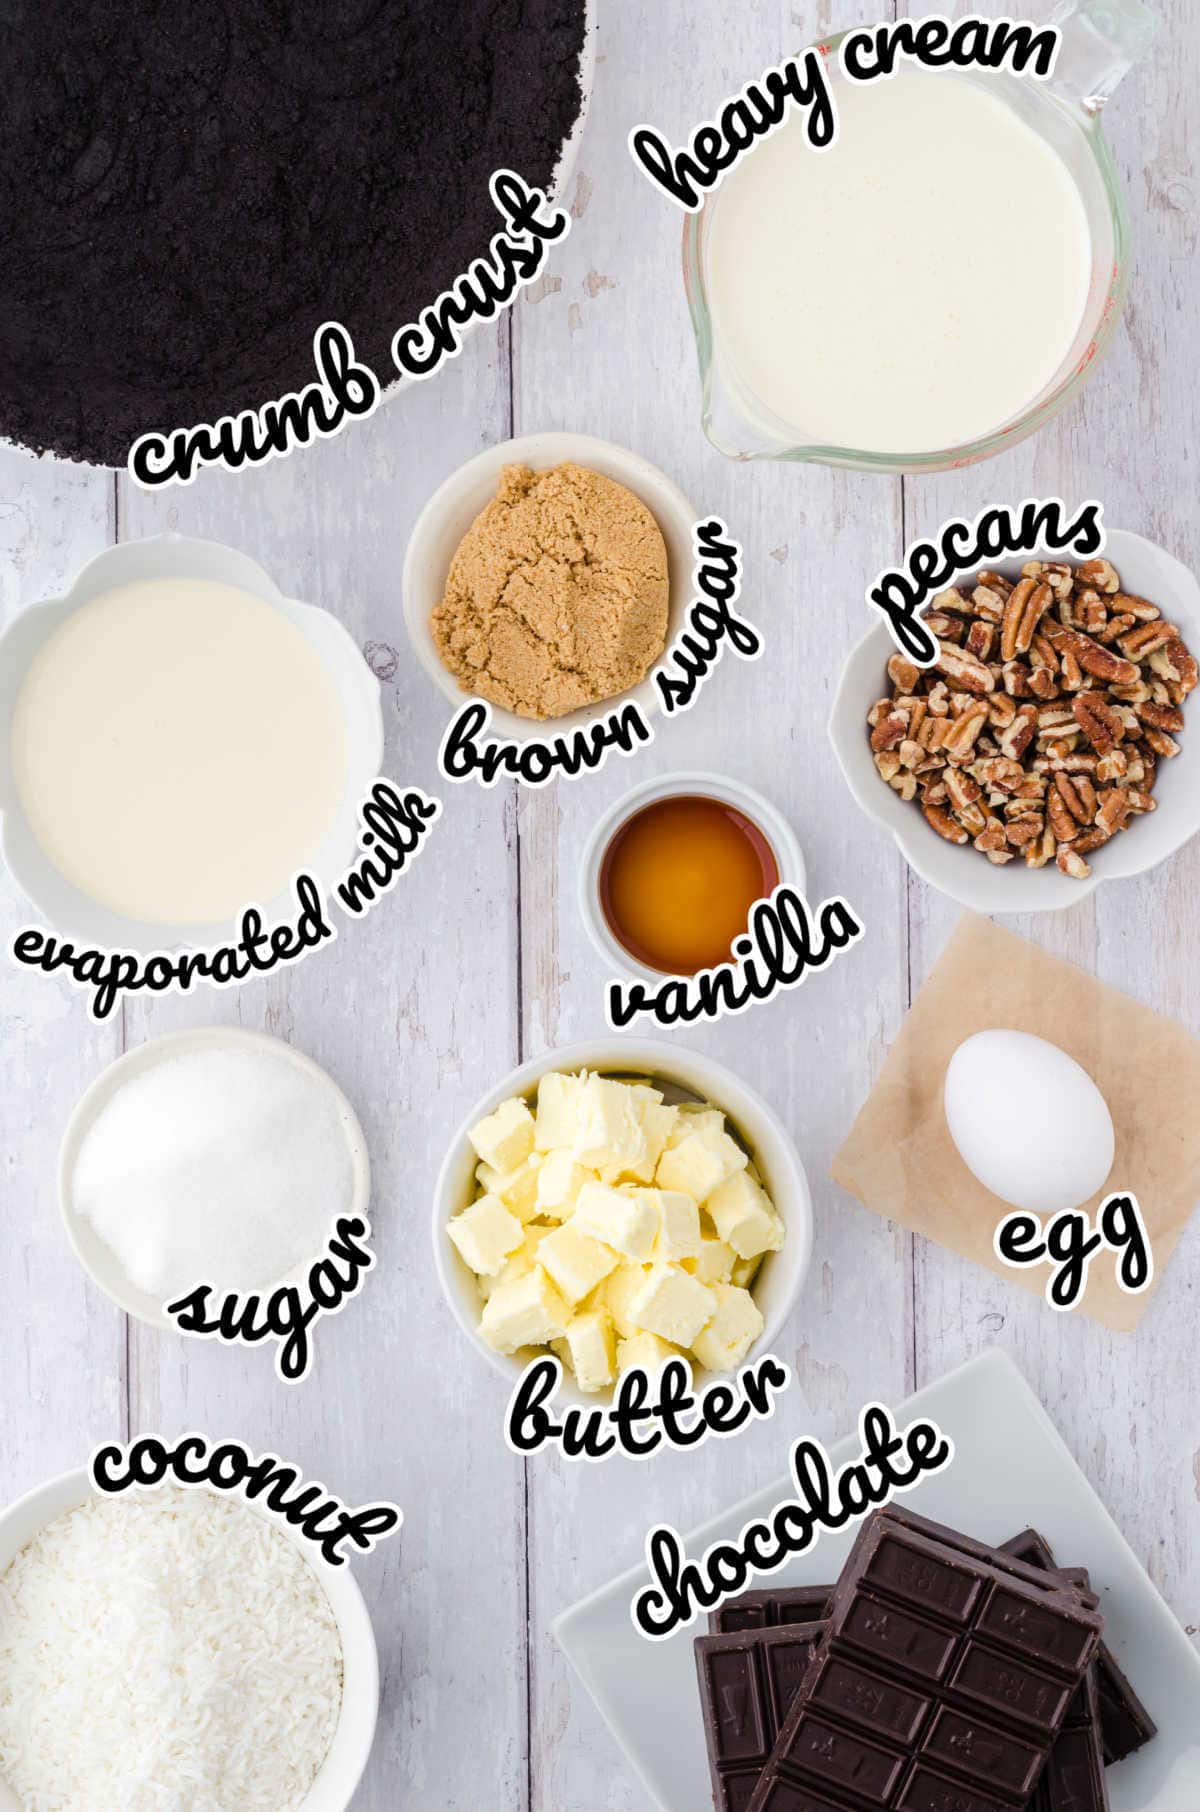 Labeled ingredients for German chocolate pie.